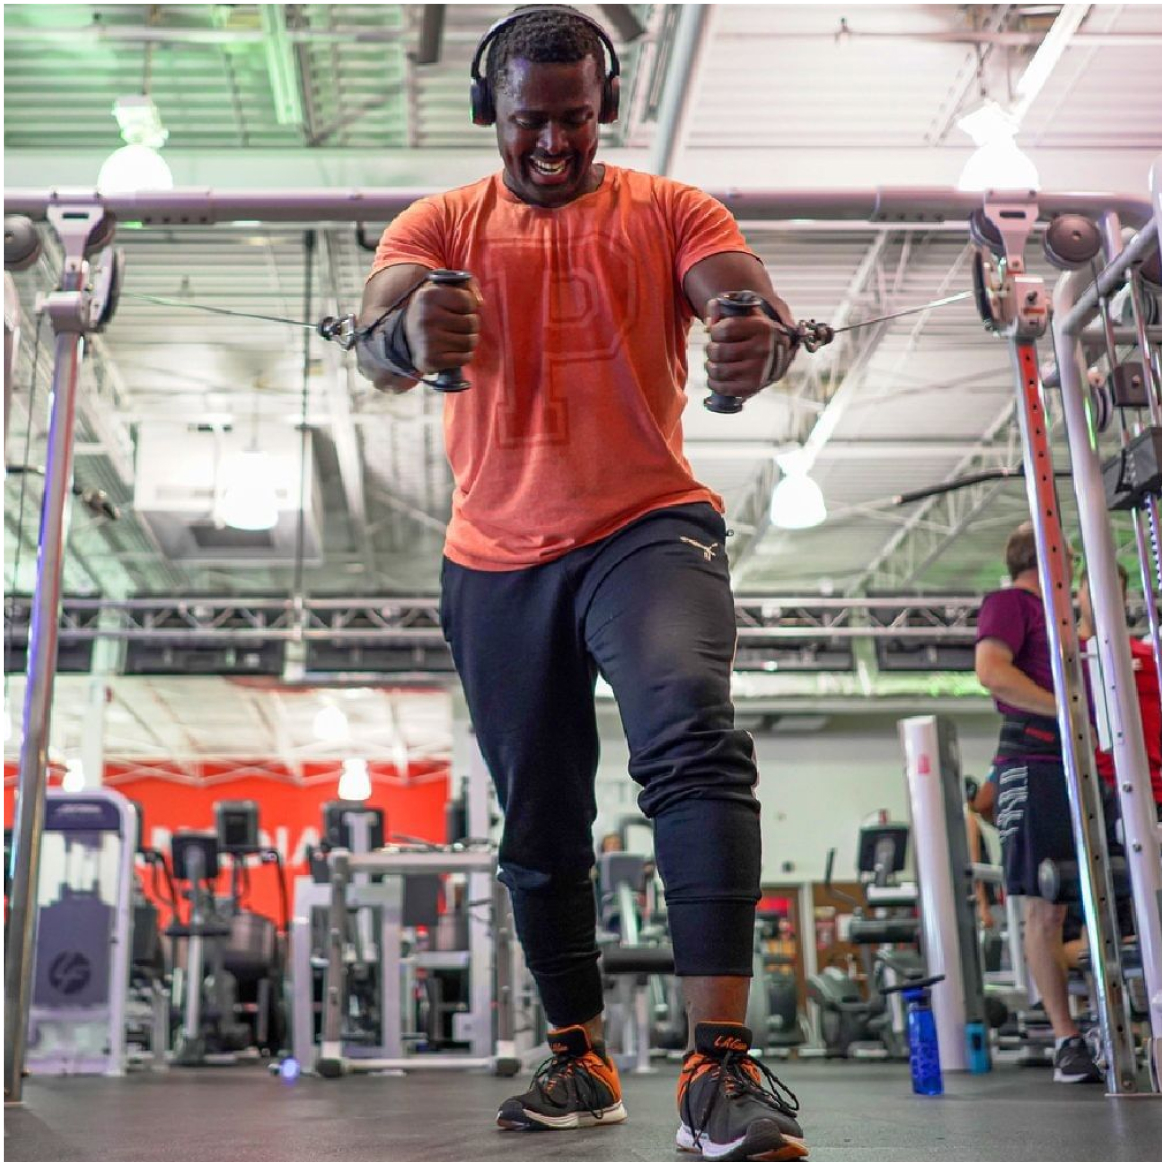 man in orange t-shirt with headphones does a chest press on a pulley machine